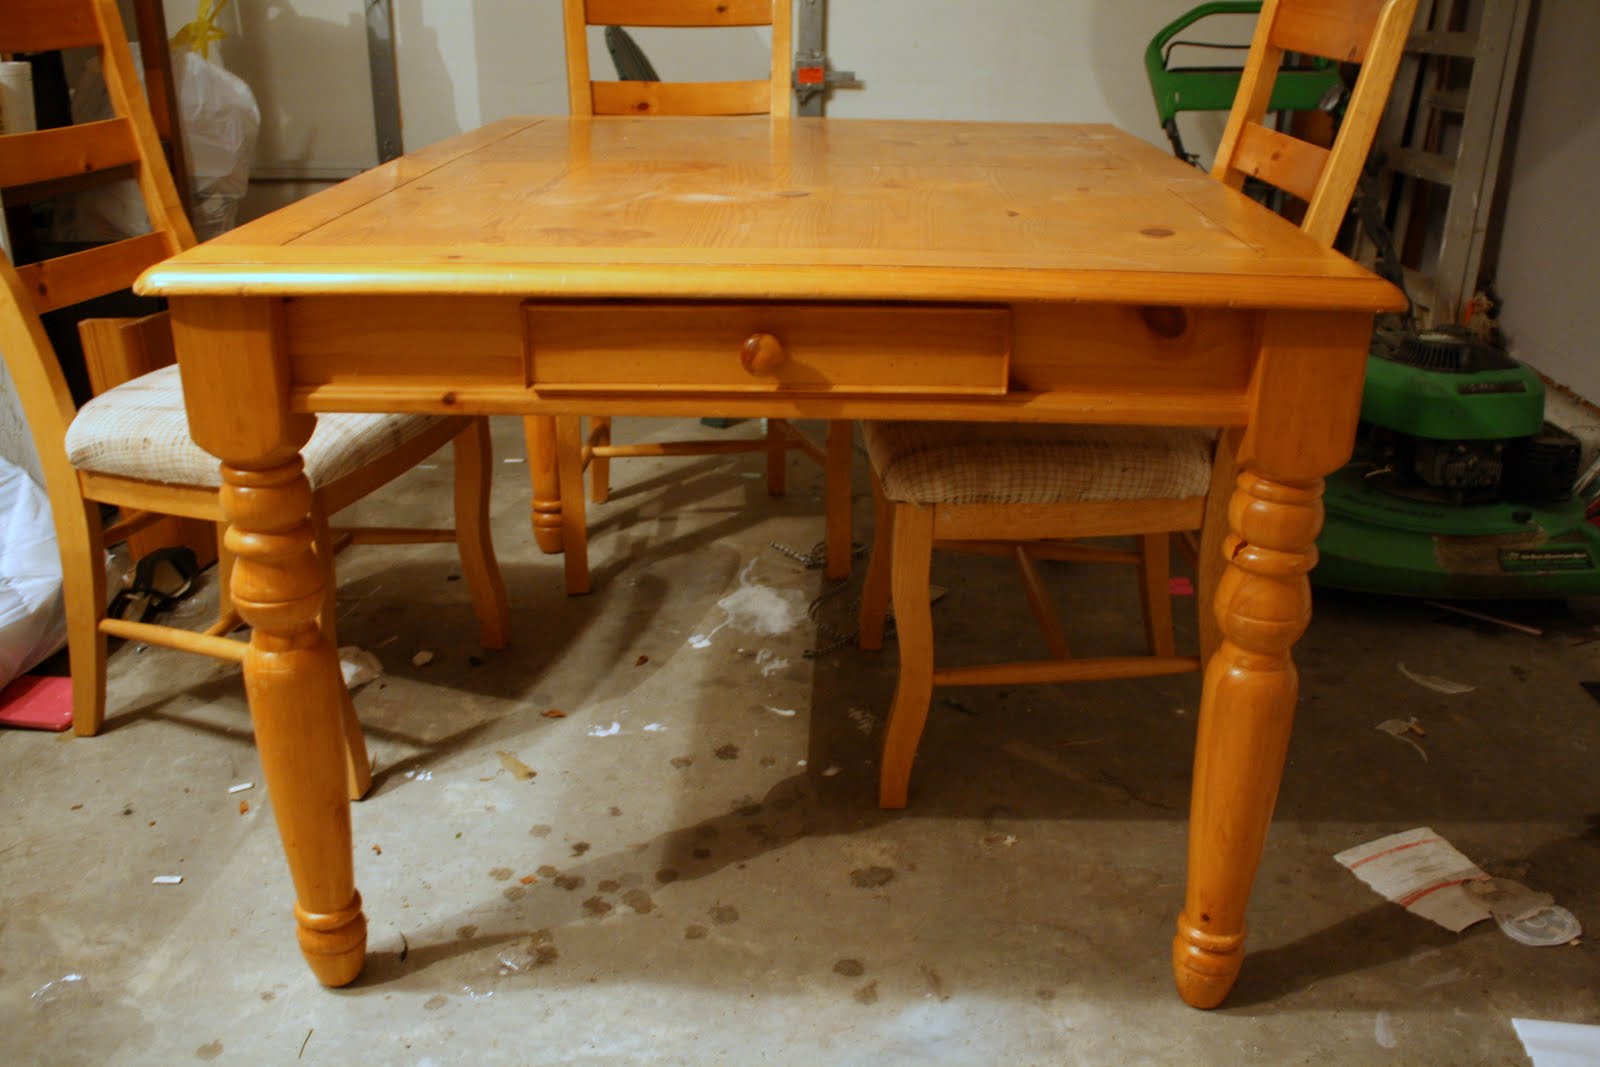 Refinishing The Dining Room Table, Honey Oak Dining Room Table